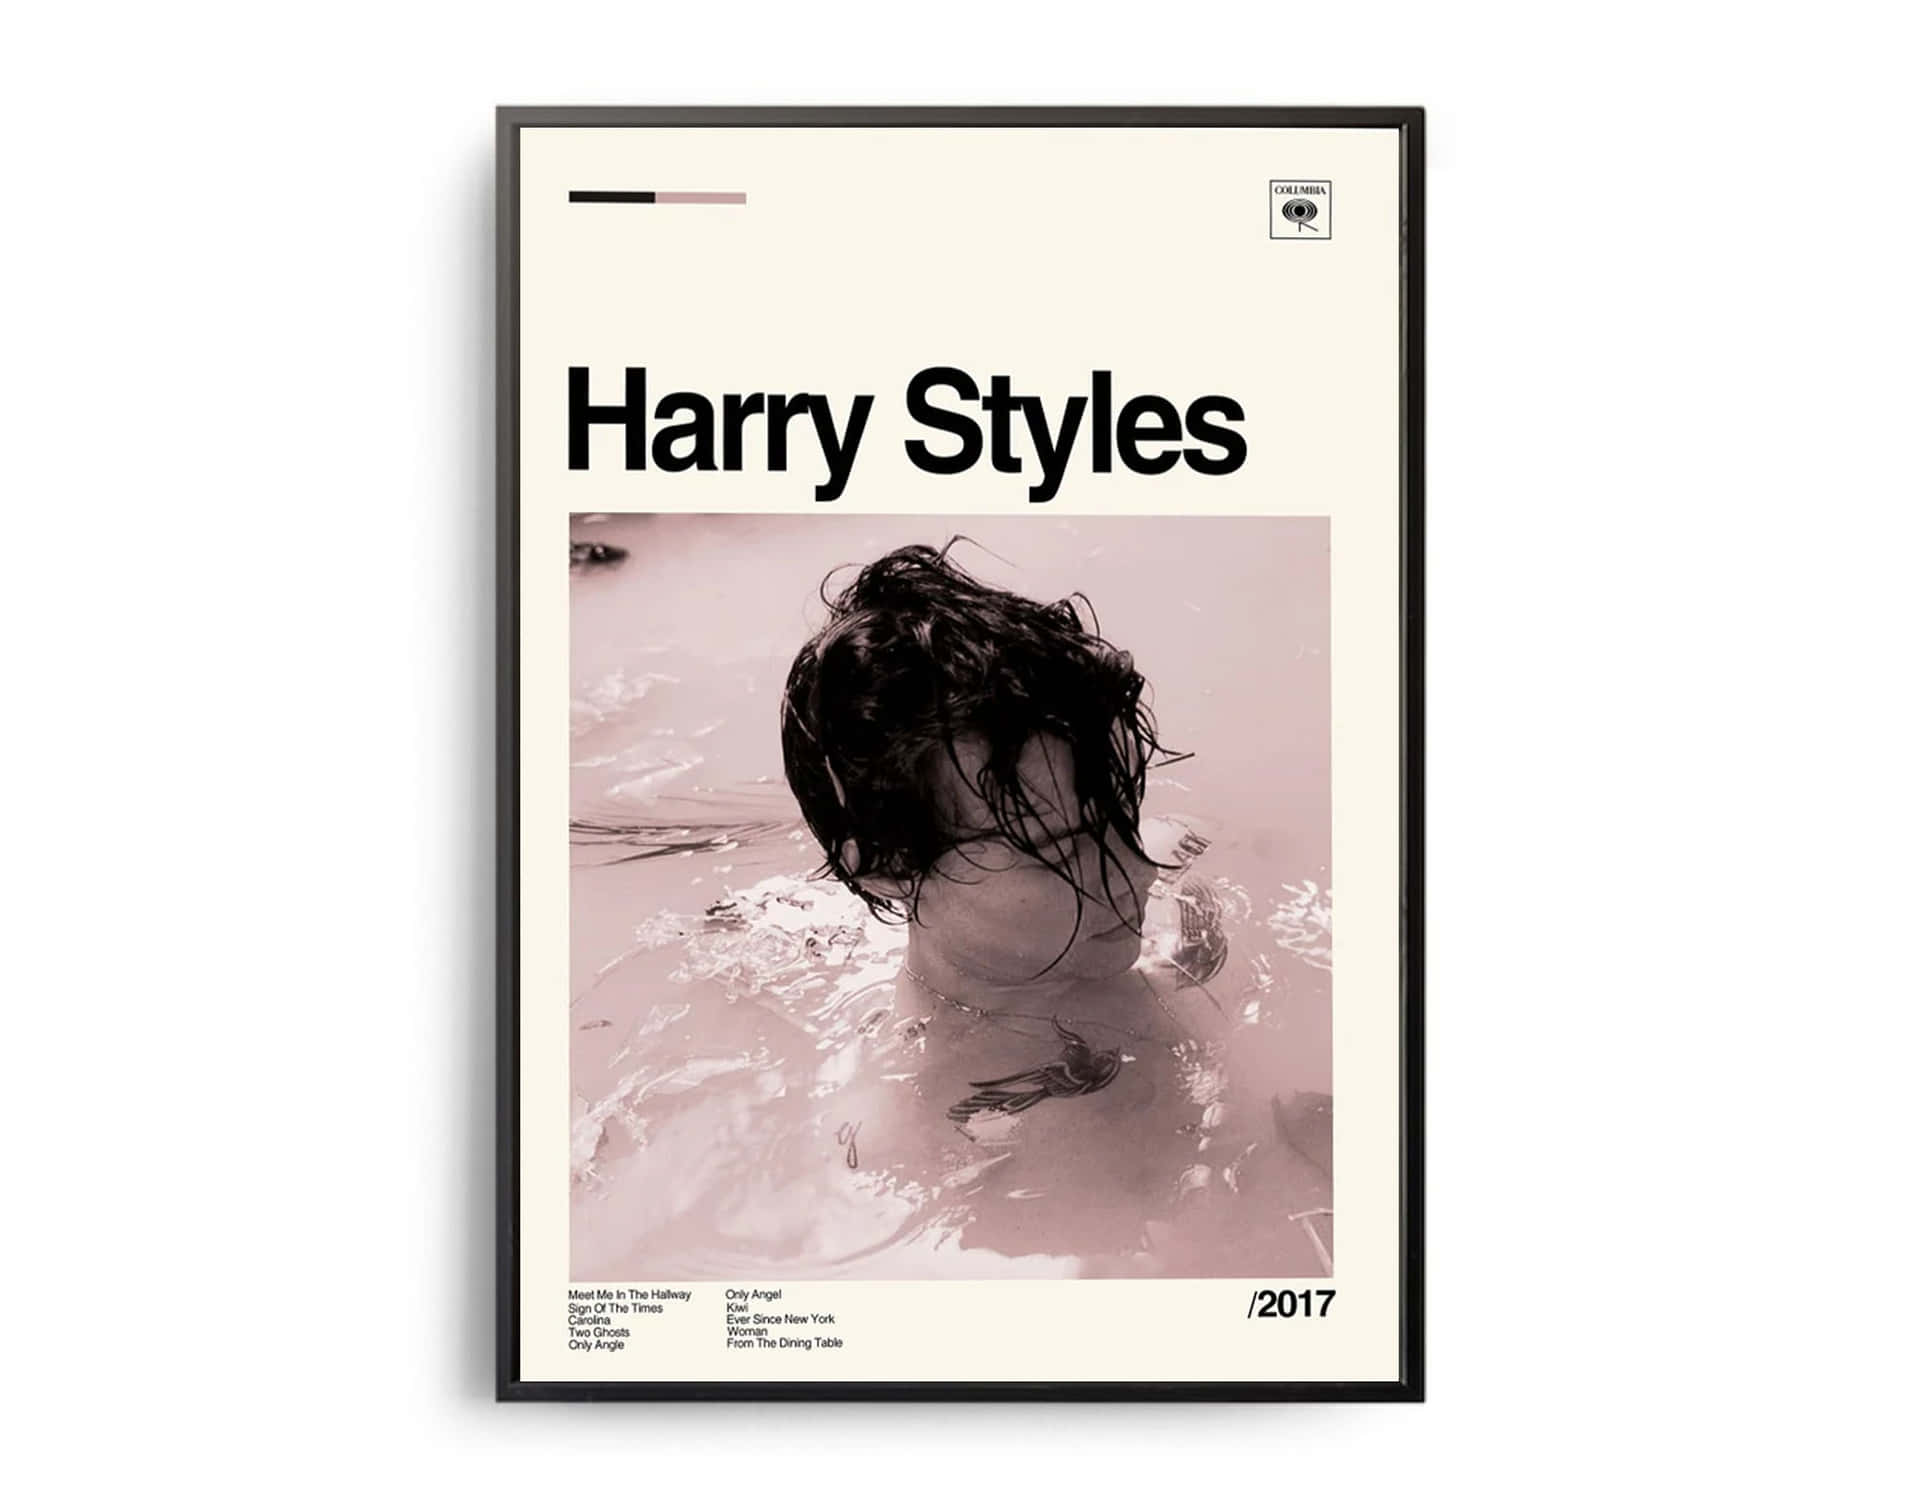 2017 Harry Styles Album Cover In A Poster Wallpaper